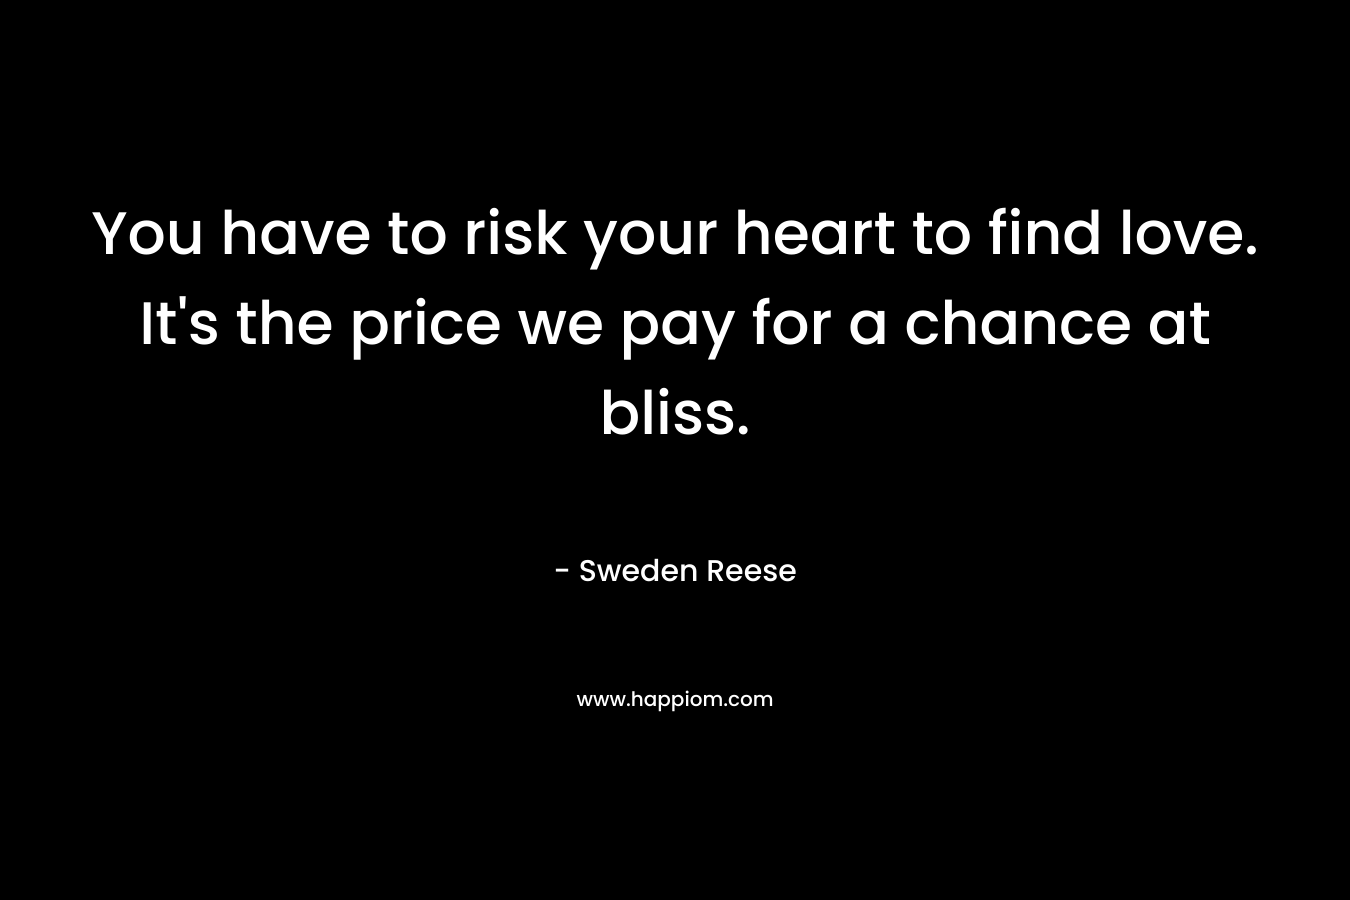 You have to risk your heart to find love. It’s the price we pay for a chance at bliss. – Sweden Reese